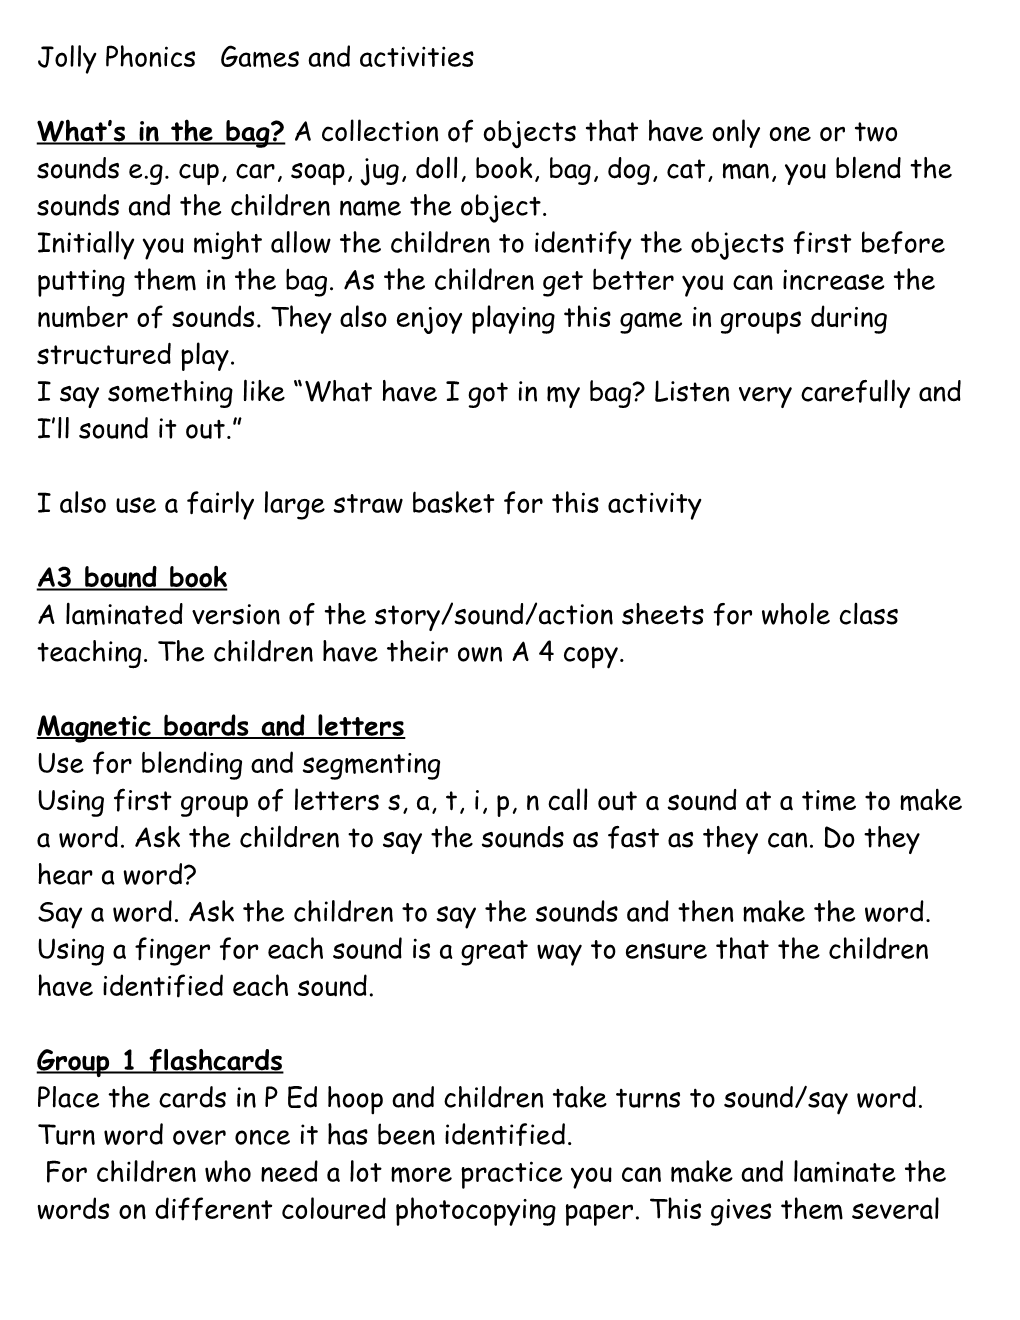 Jolly Phonics Games and Activities